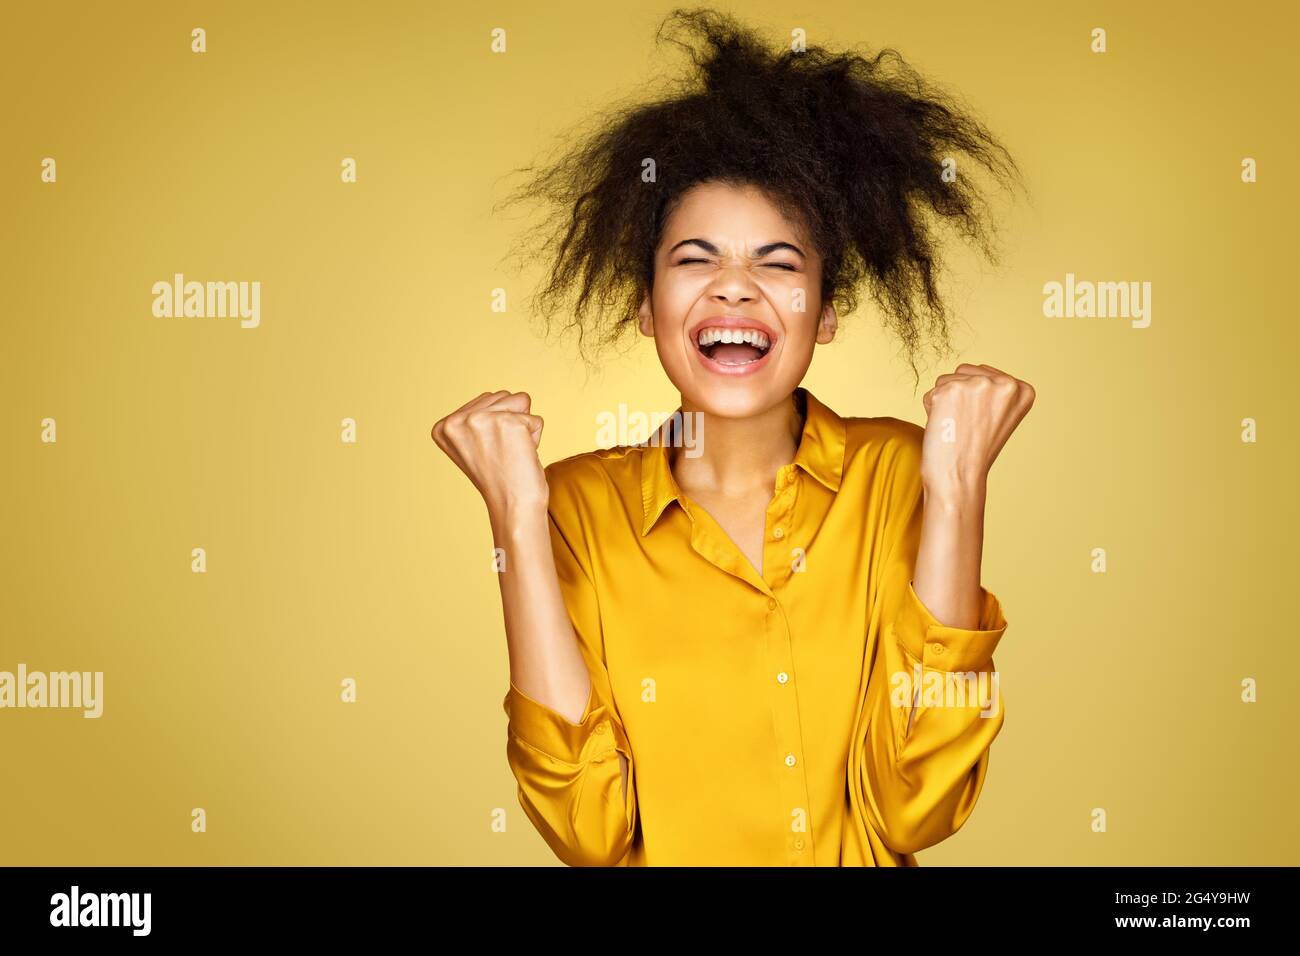 Joyful girl holds fists clenched, celebrates success. Photo of african american girl on yellow background Stock Photo